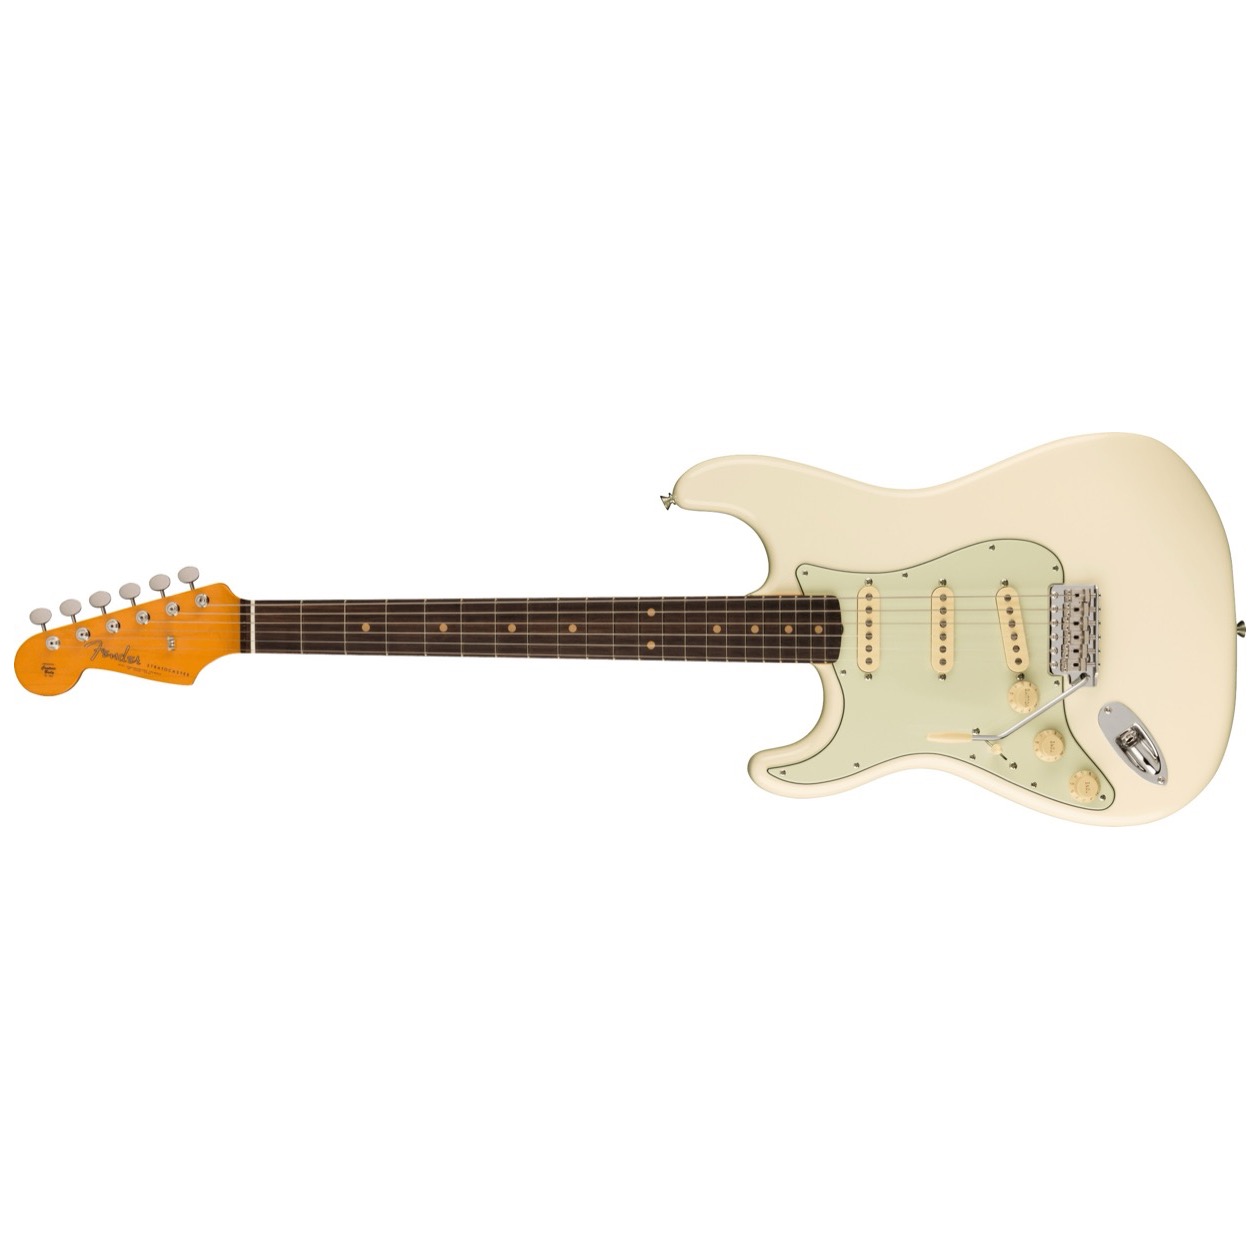 Fender American Vintage II 1961 Stratocaster LEFT HAND, Rosewood Fingerboard, Olympic White Inclusief Luxe Case Vintage-Style Brown (Orange Interior)